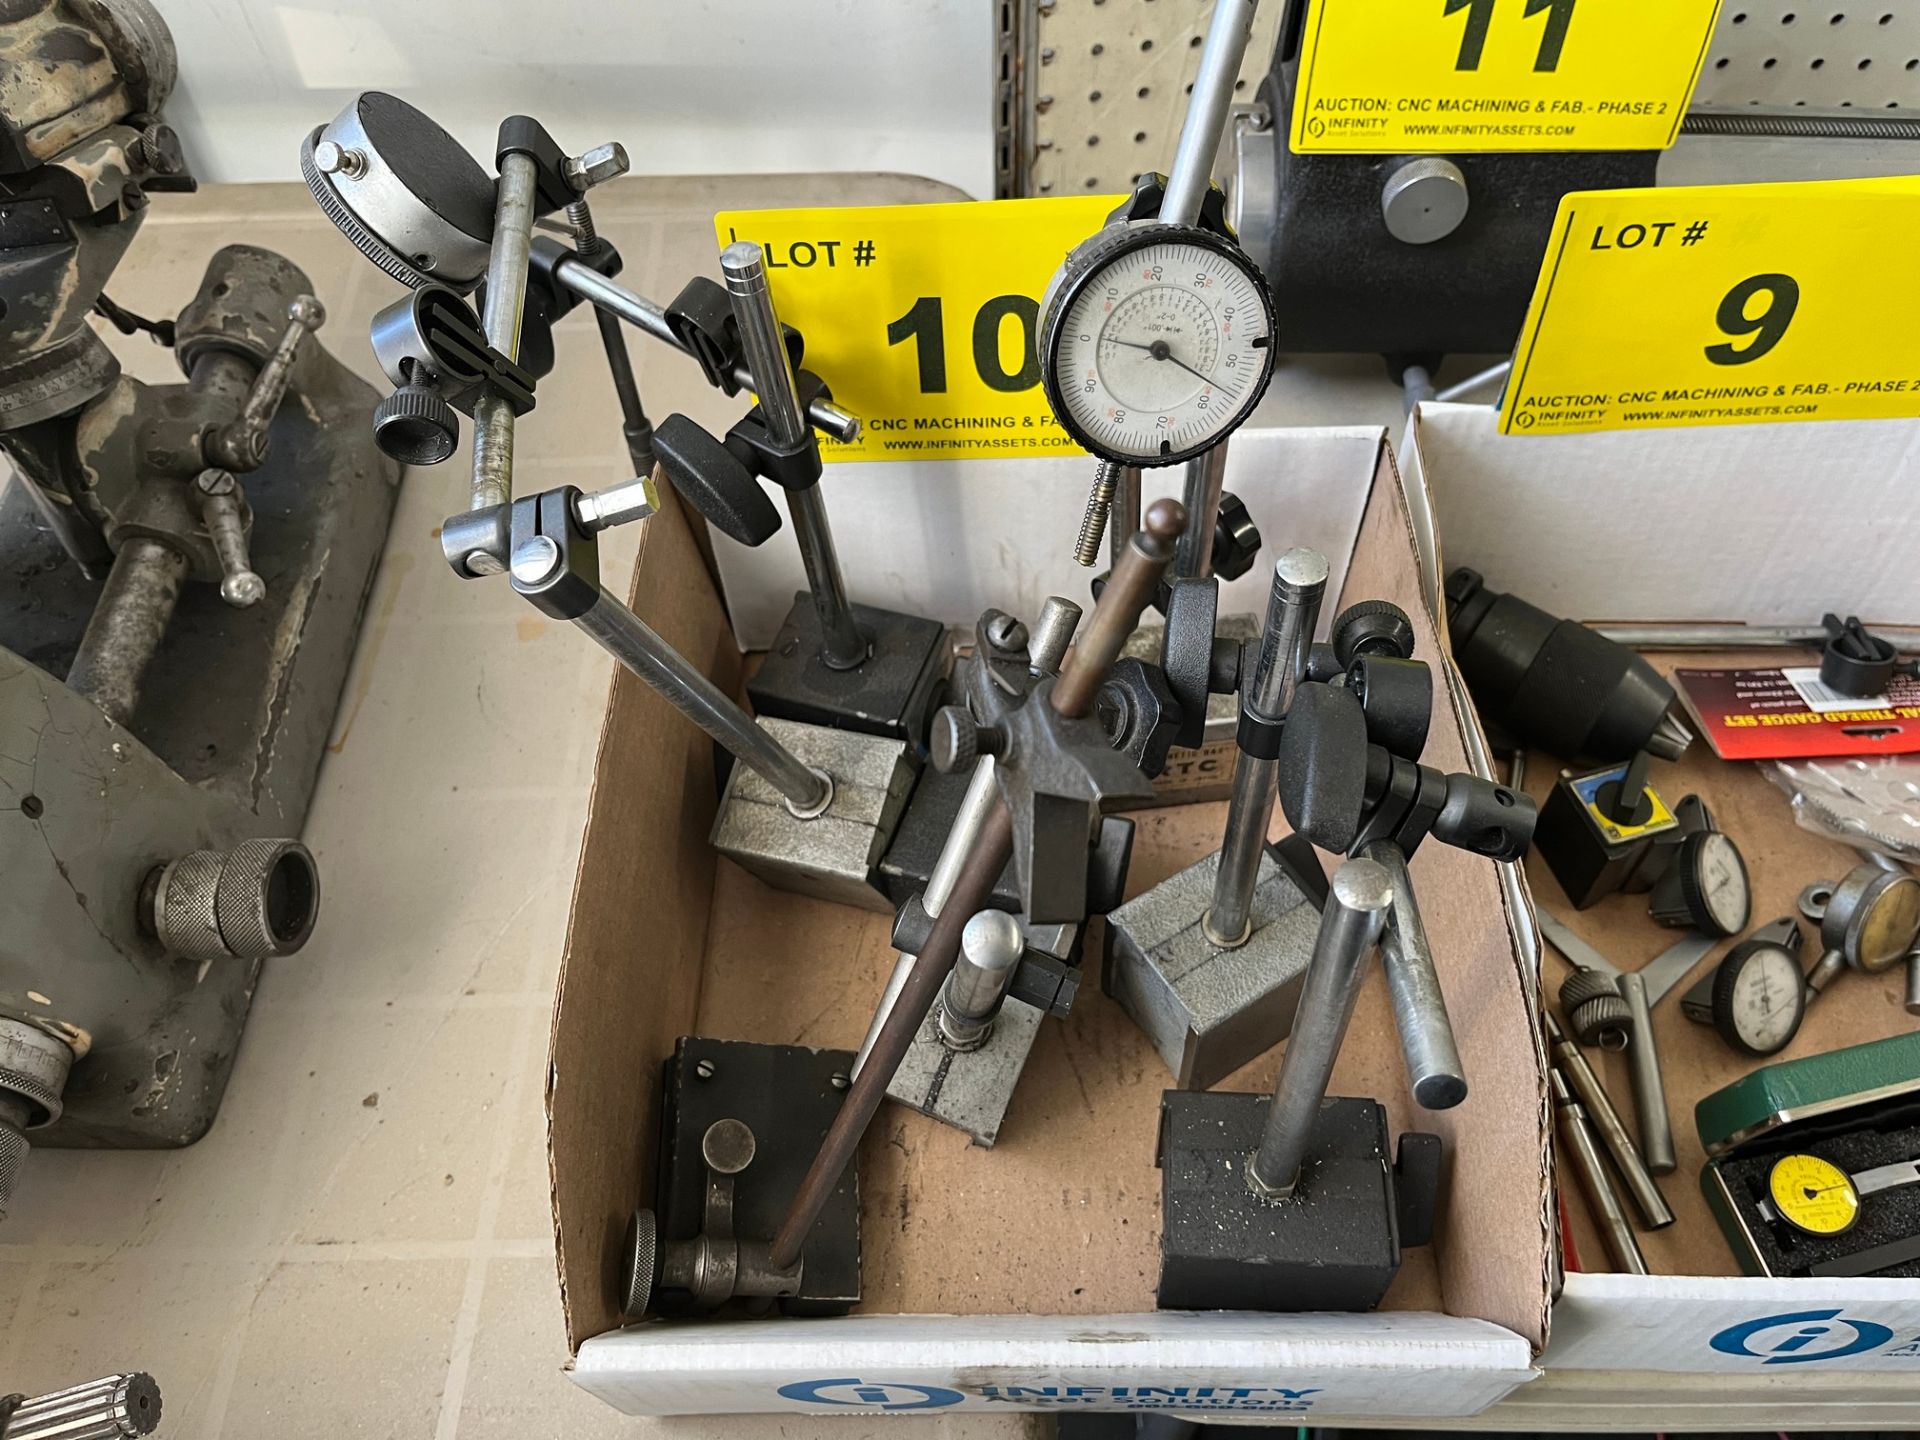 BOX OF MAG BLOCKS, HEIGHT STAND, DIAL GAUGES